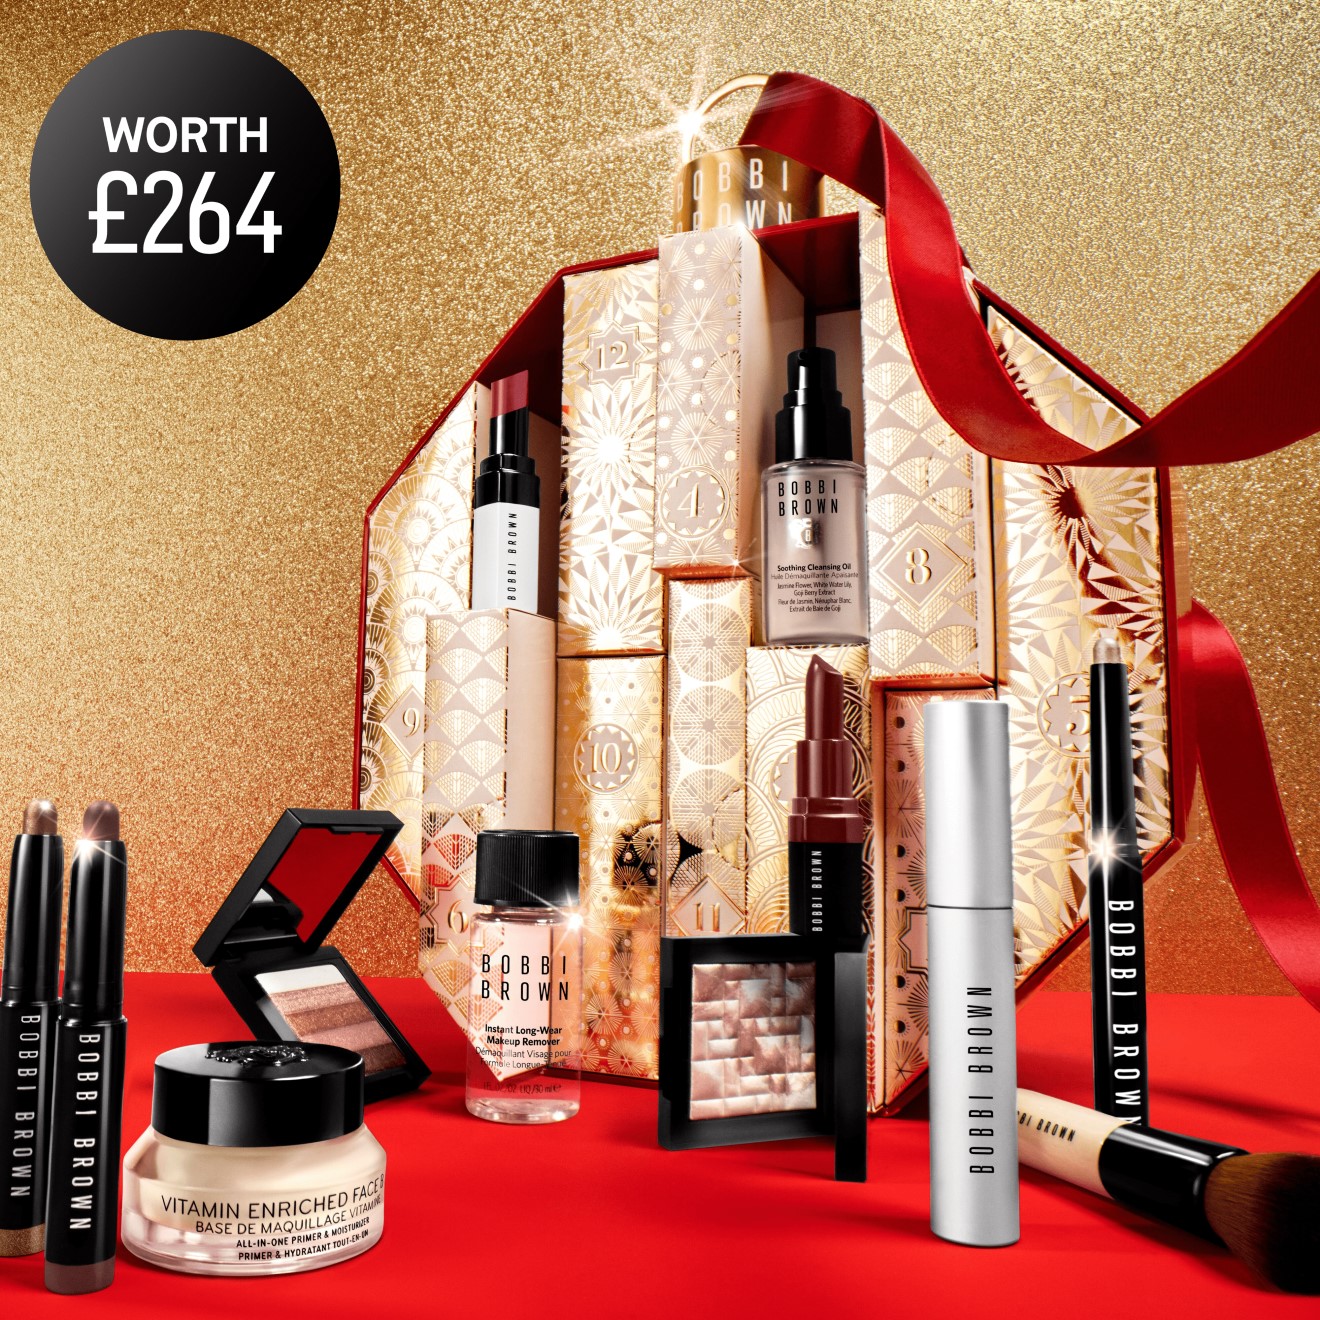 The 2023 Bobbi Brown Advent Calendar, revealing some of the product contents, decorated with a luxury red ribbon